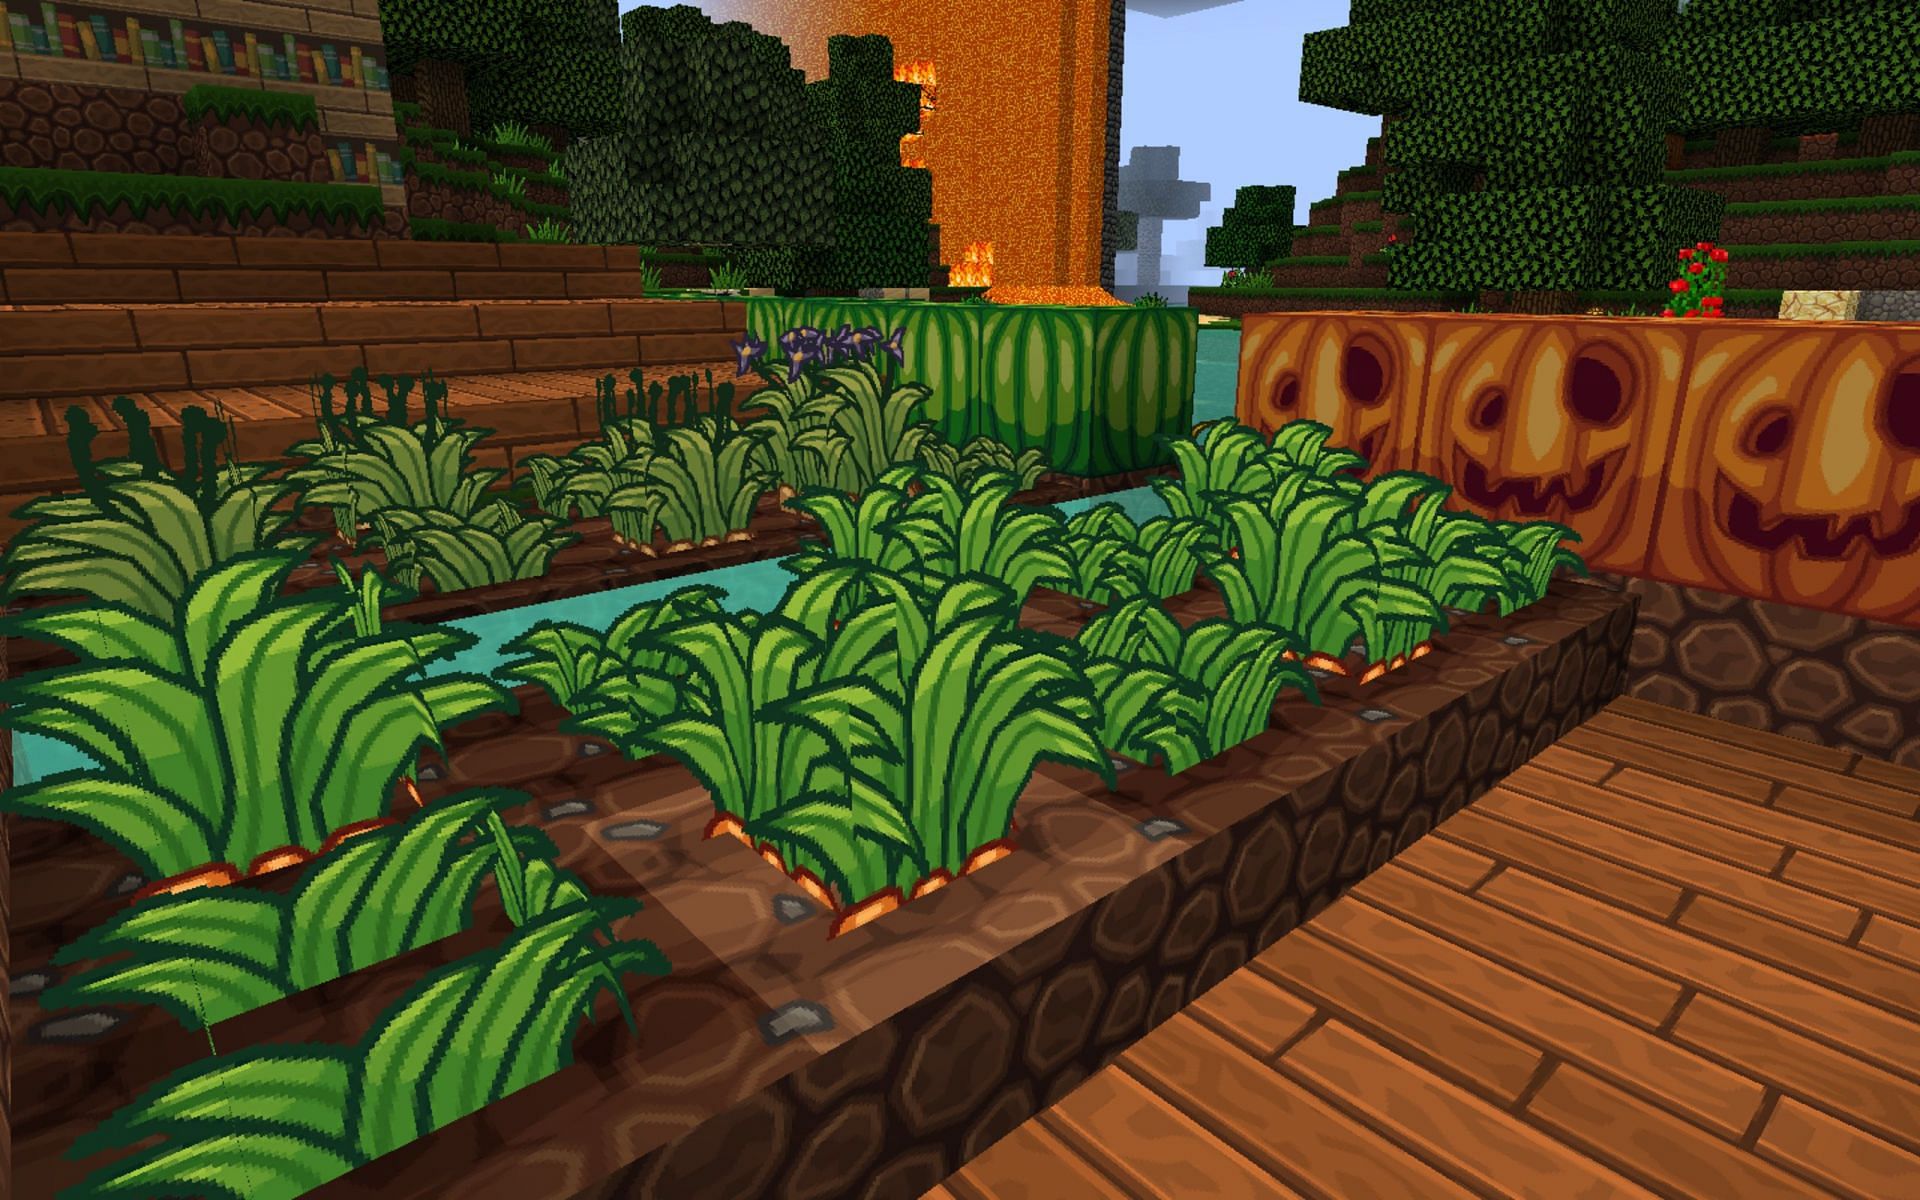 Players can improve their farming experience by using visually-pleasing texture packs (Image via Mojang)